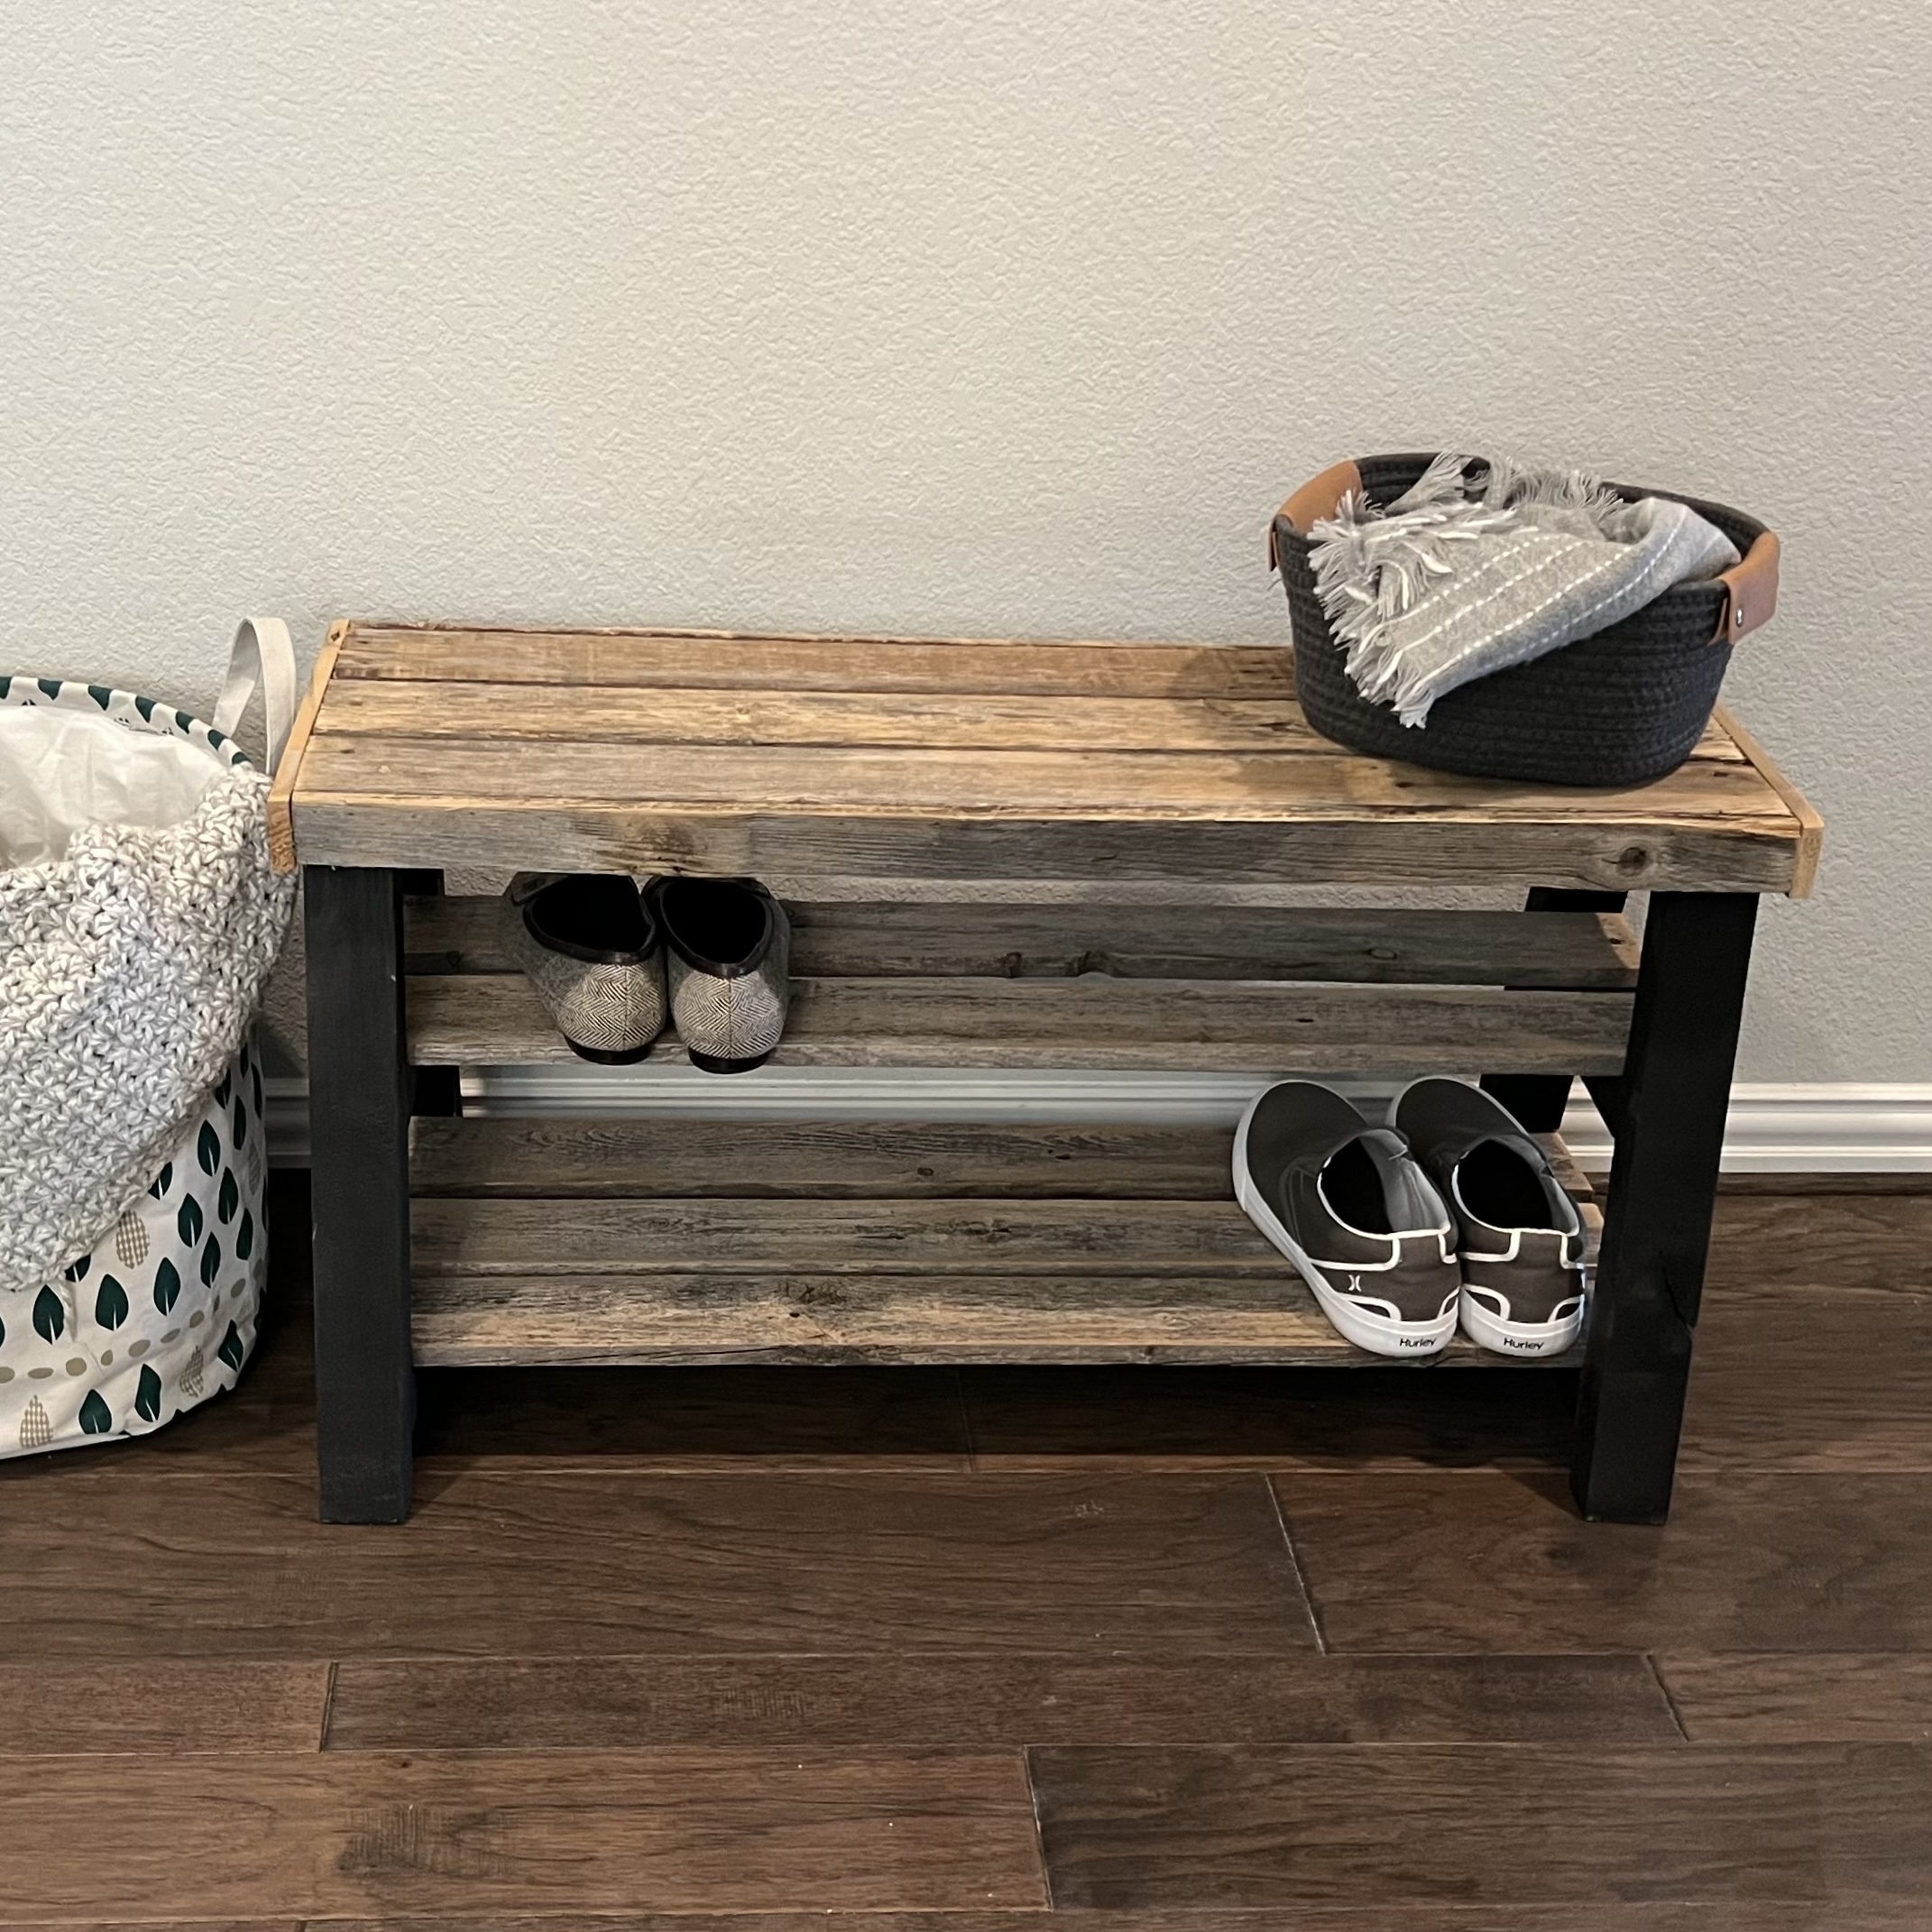 Reclaimed Wood Industrial Look Solid Black Pine Base Shoe Rack Storage Bench for Utility Room, Entry, Hallway